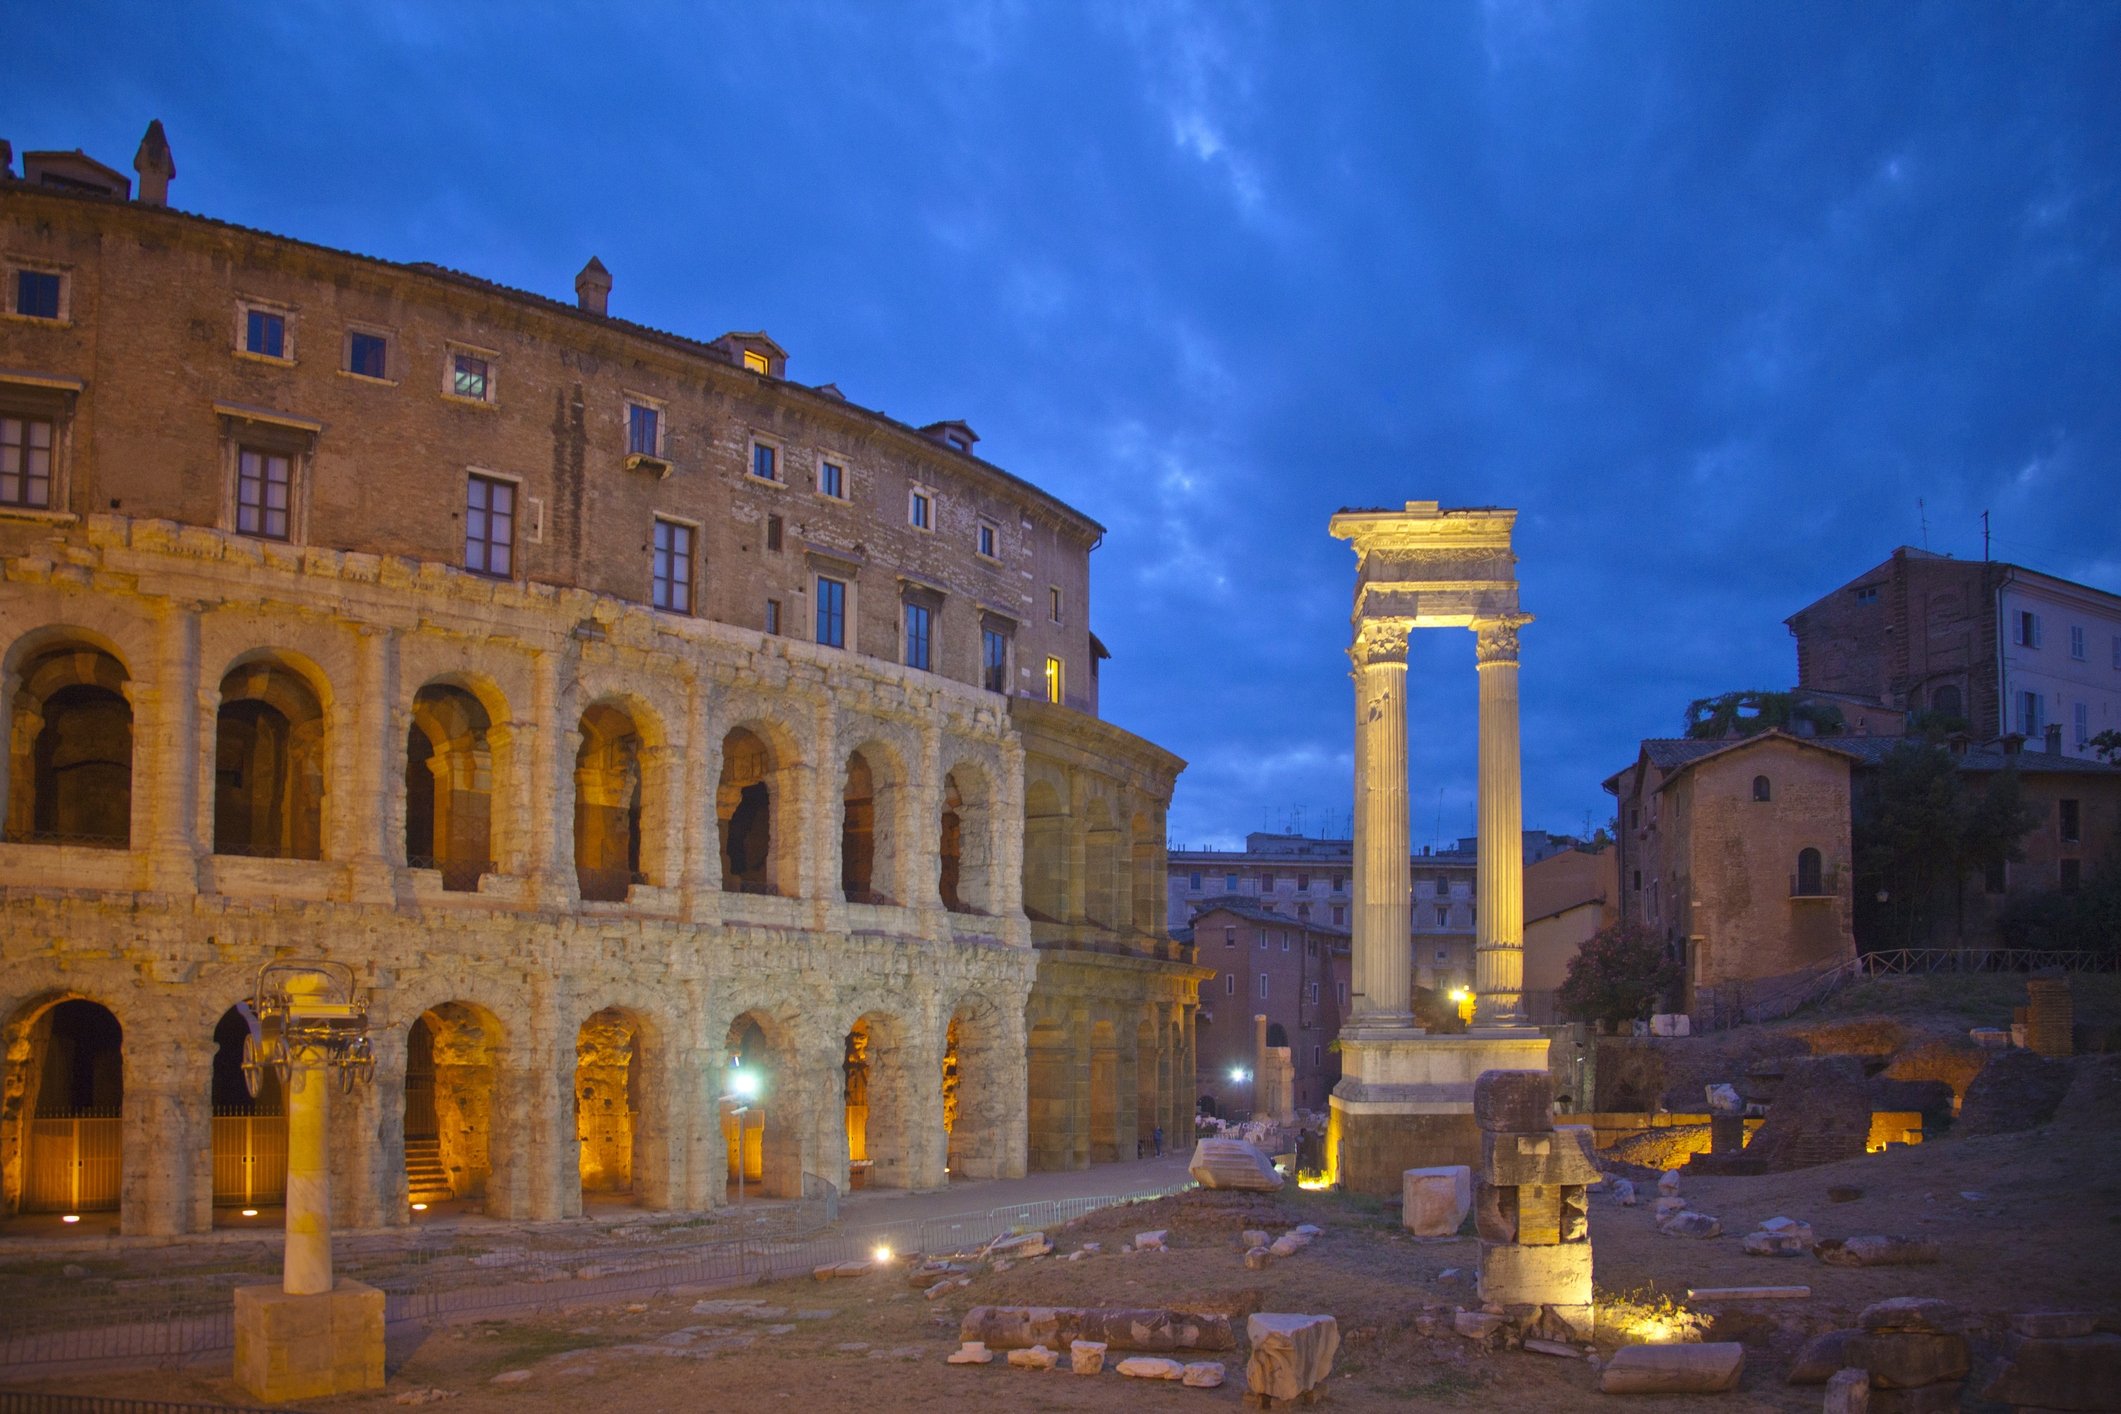 Marcellus Theater, (Teatro di Marcello,) an ancient entertainment place, commissioned by Julius Caesar, resembles the Colosseum. (Getty Images Photo)